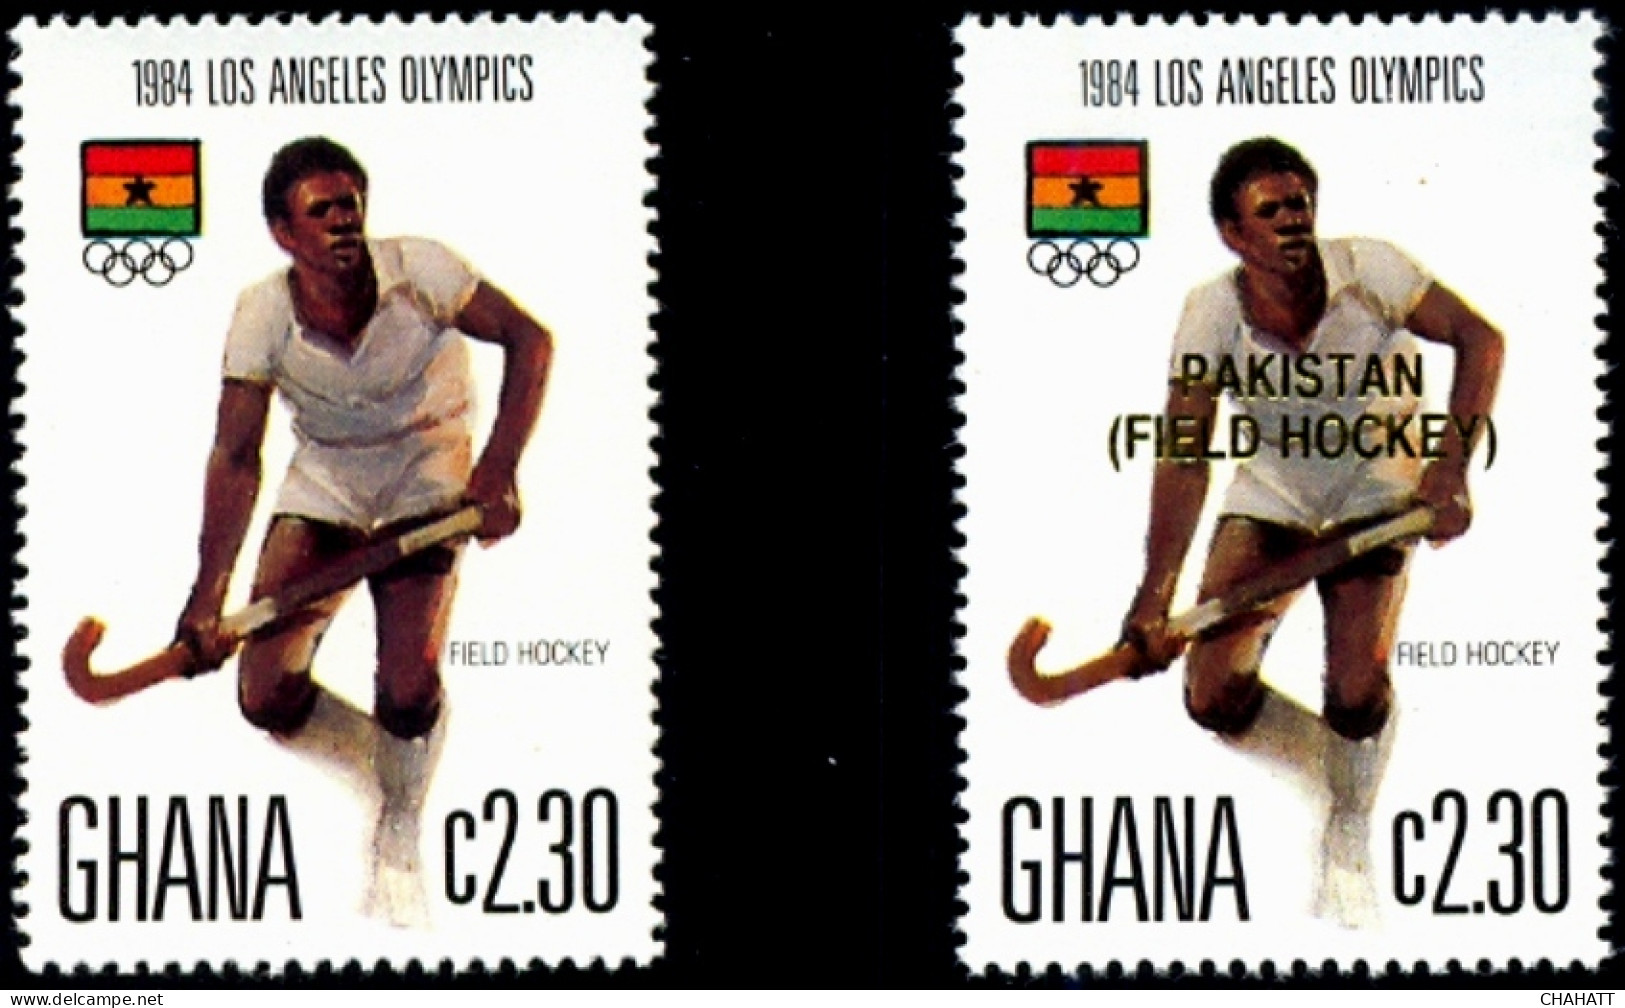 SUMMER OLYMPICS-1984-FIELD HOCKEY-NORMAL STAMP WITH AN OVERPRINT IN GOLD -GHANA-MNH-A5-86 - Hockey (Field)